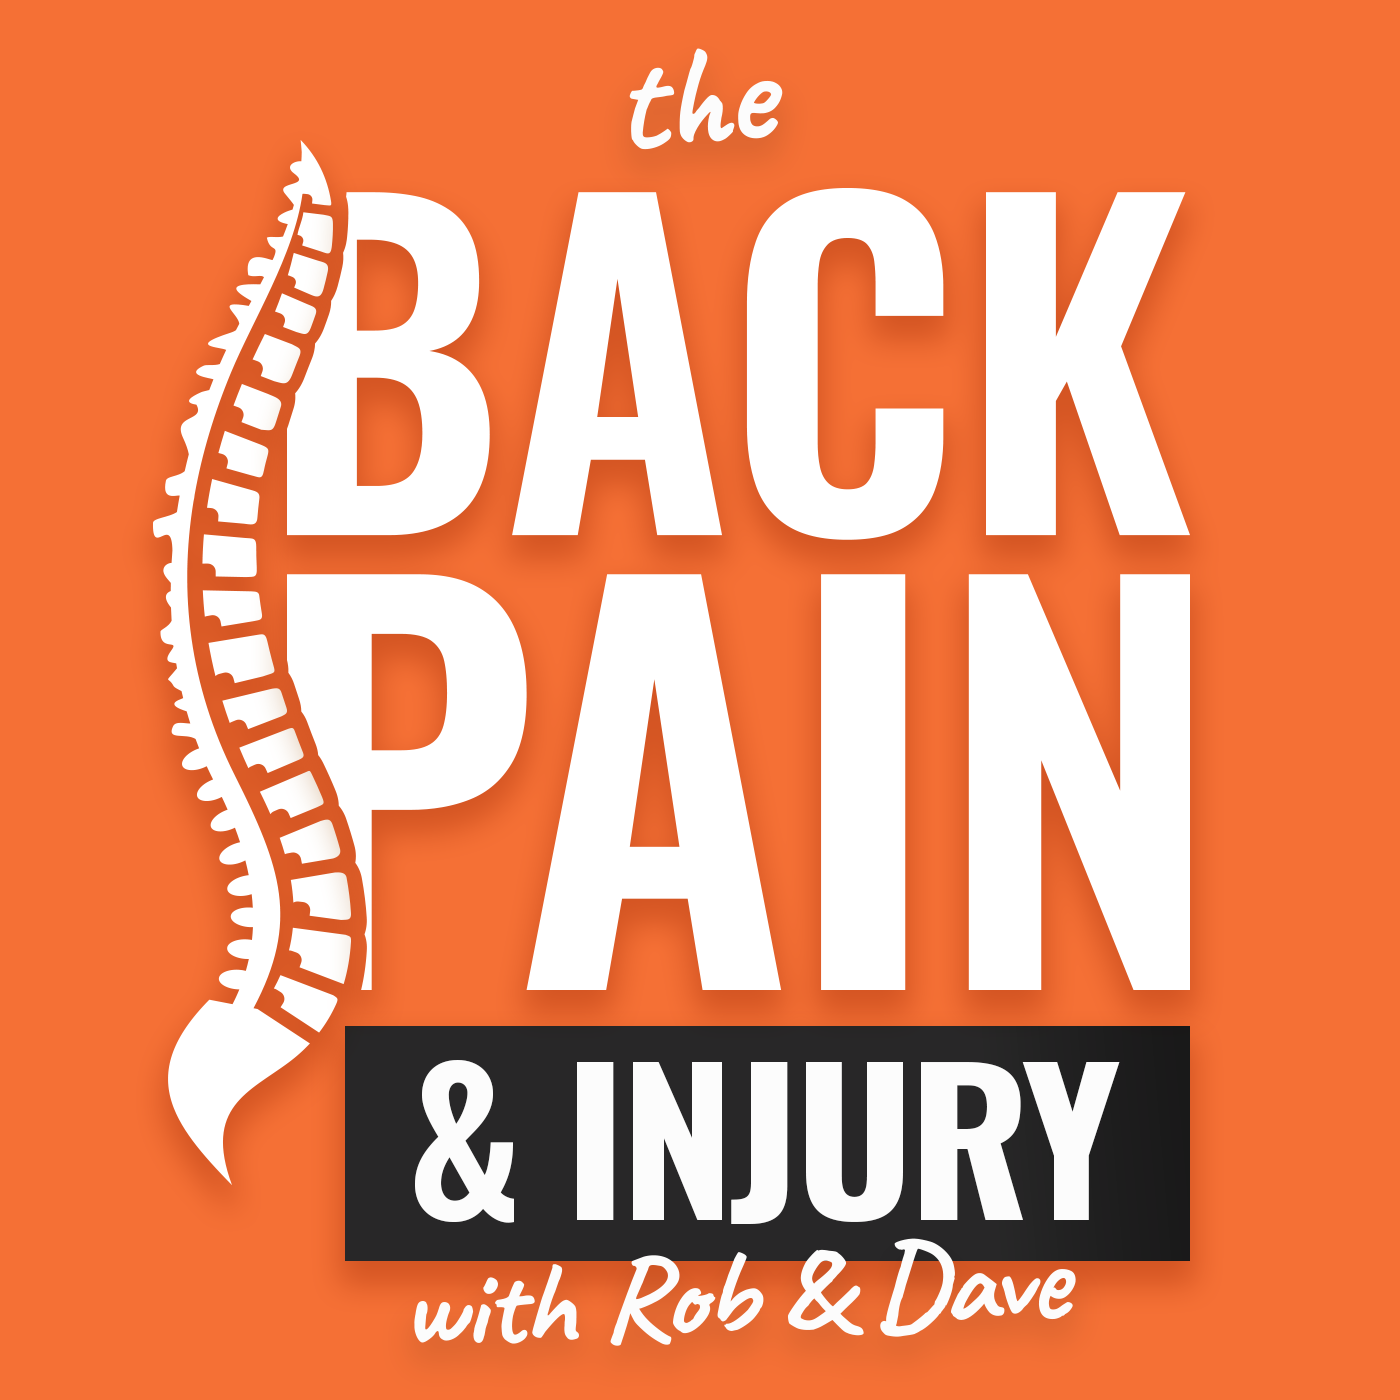 What Everyone Should Know About Back Pain - Part 3